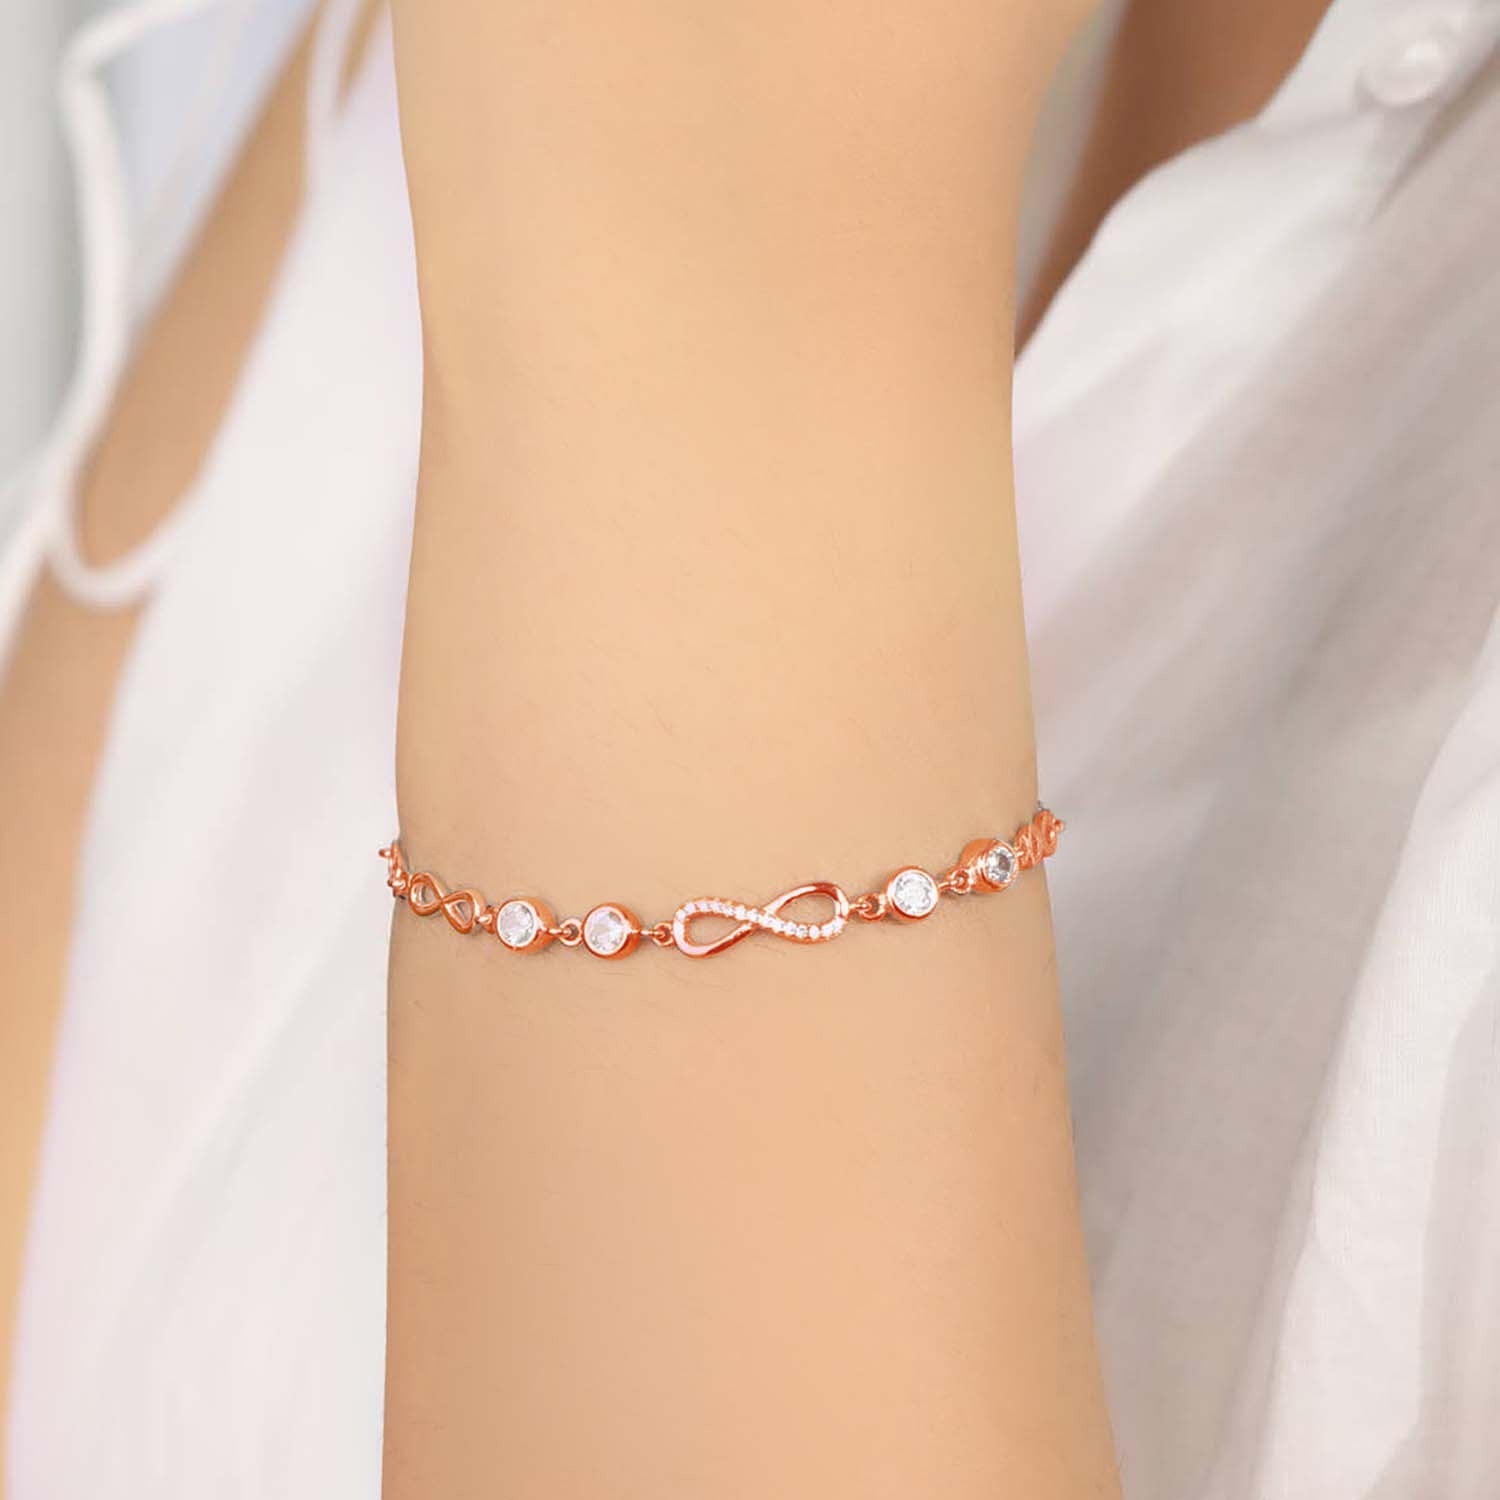 Forever Together 925 Silver Bracelet - Valentines Edition with Gift Box